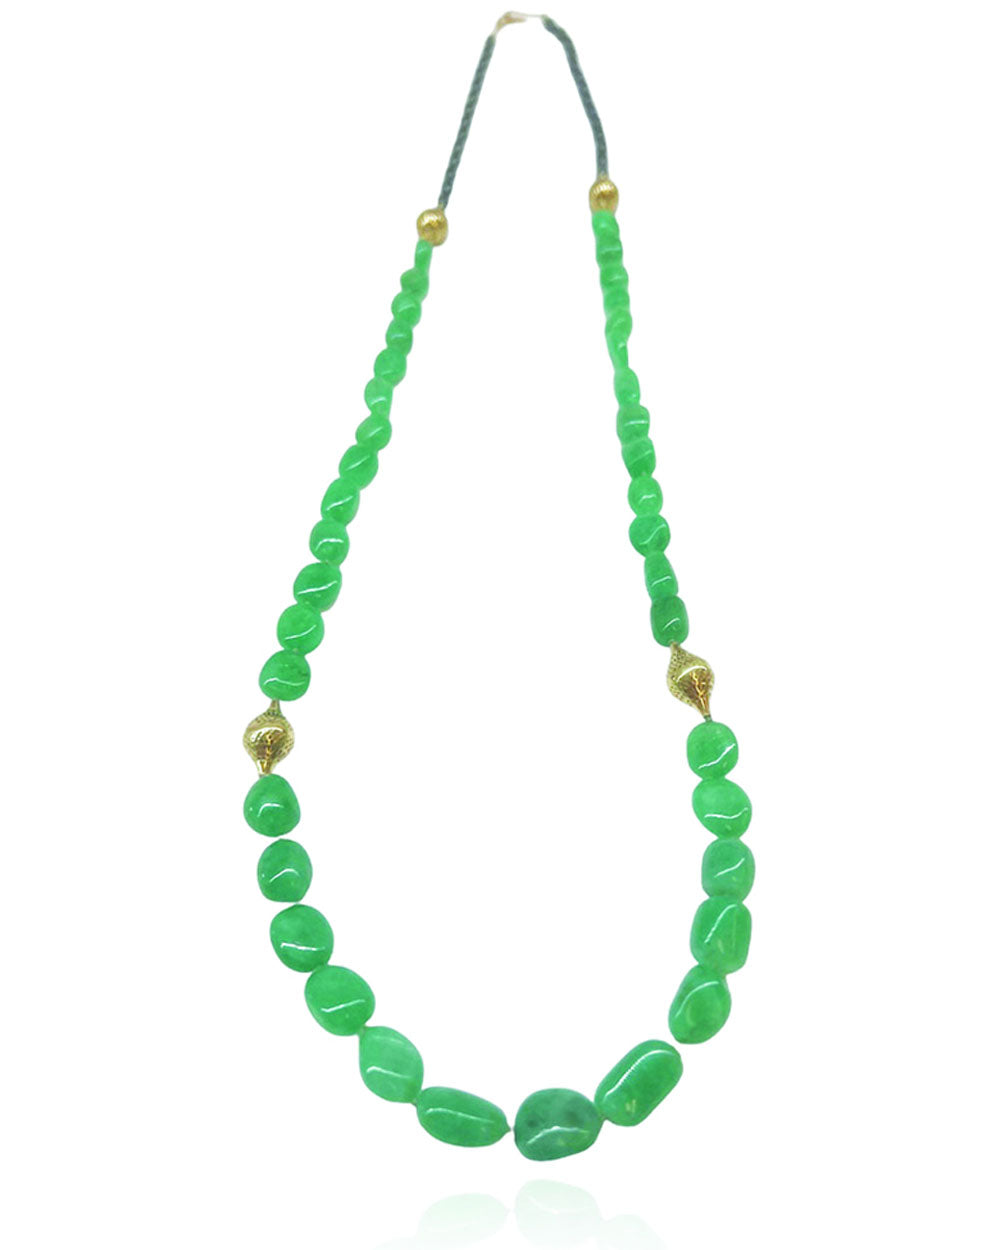 Emerald and Crownwork Necklace